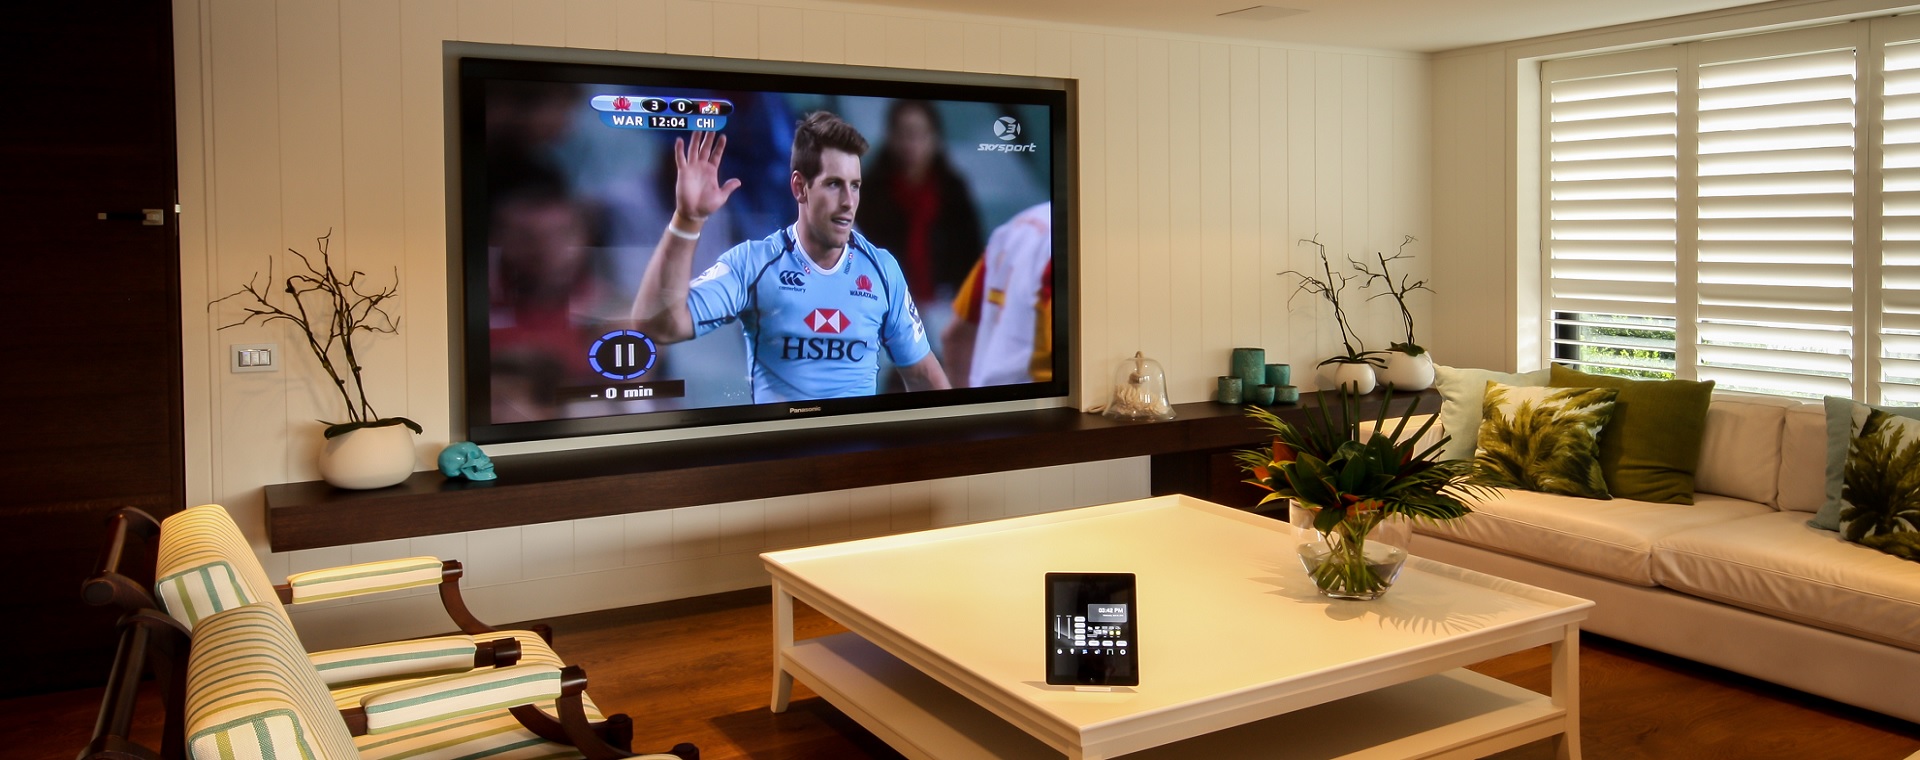 Modern lounge with large display screen showing Rugby League on screen, and touchscreen control tablet on coffee table